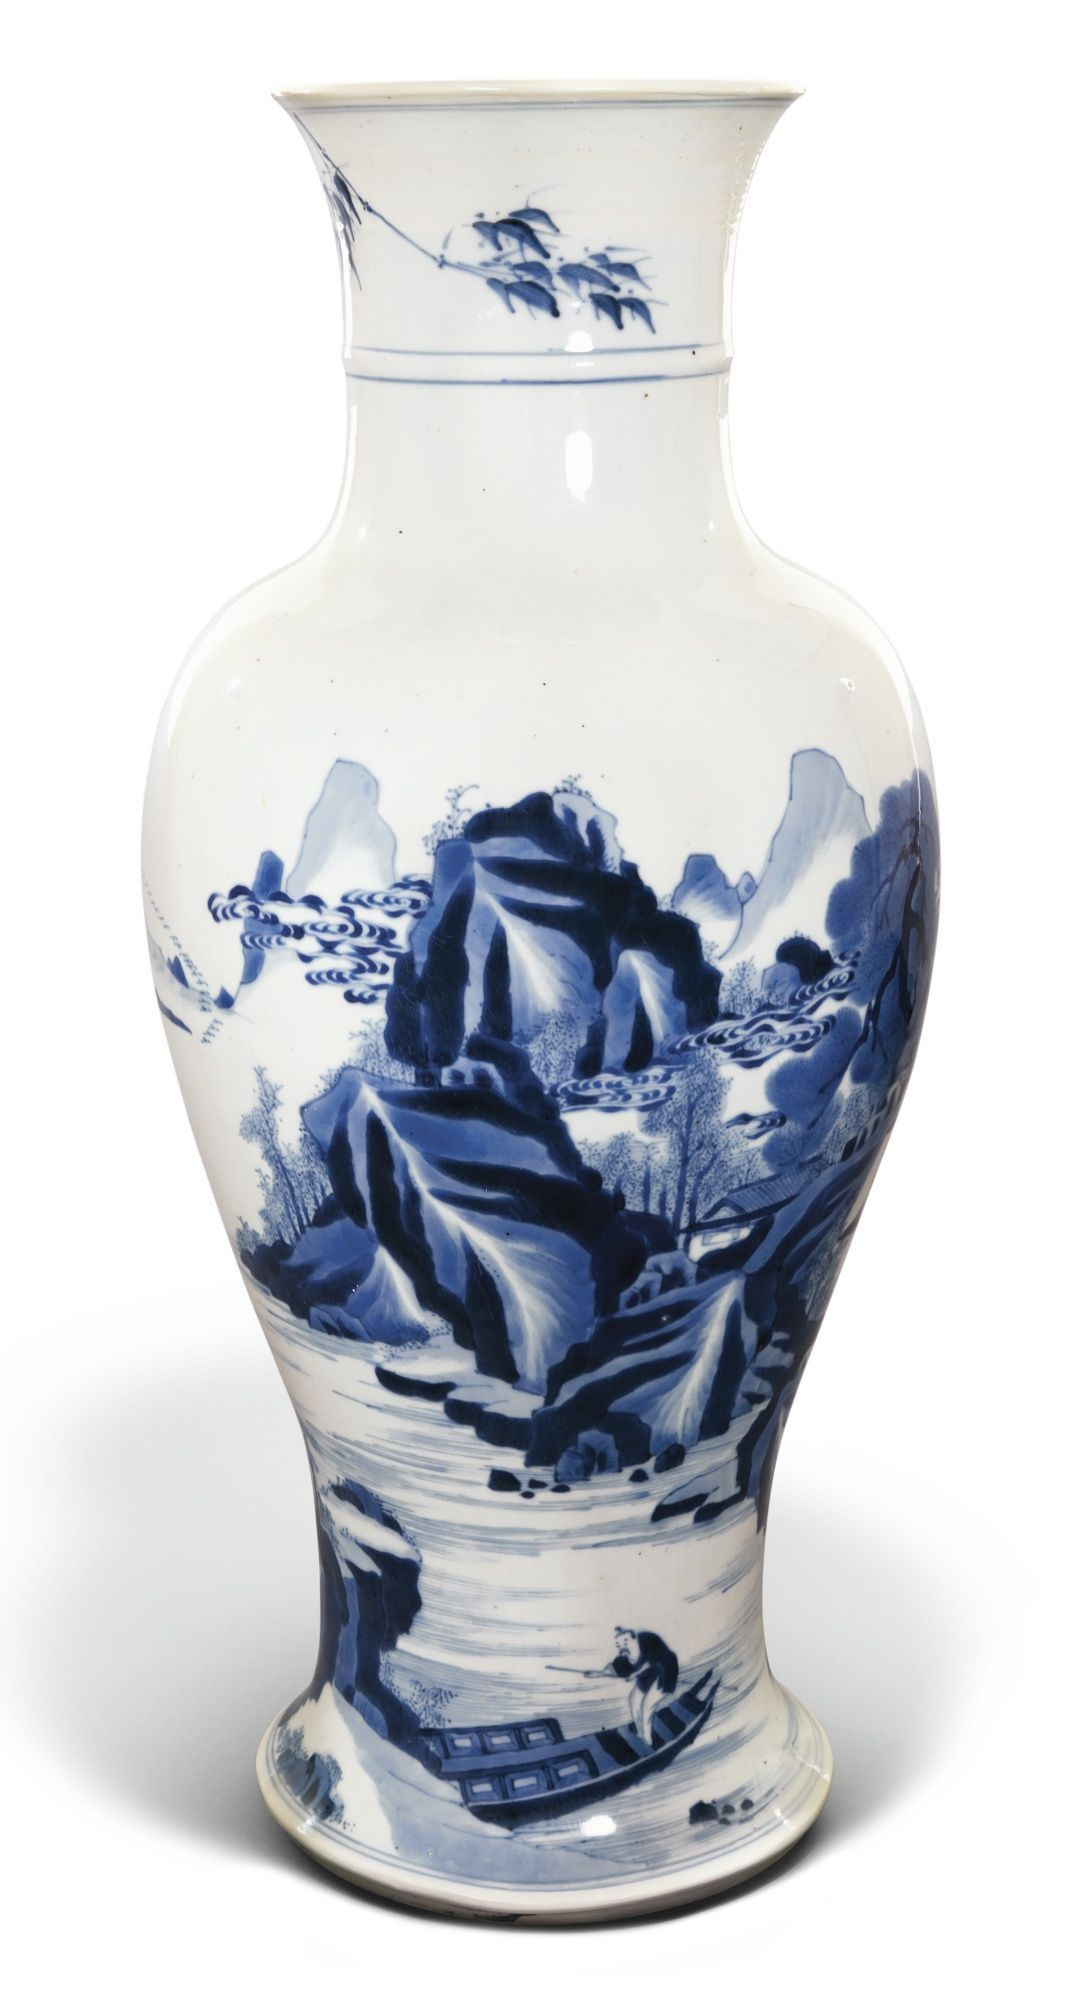 mccoy white vase of 32 wide mouth vase the weekly world inside a large blue and white baluster vase qing dynasty kangxi period